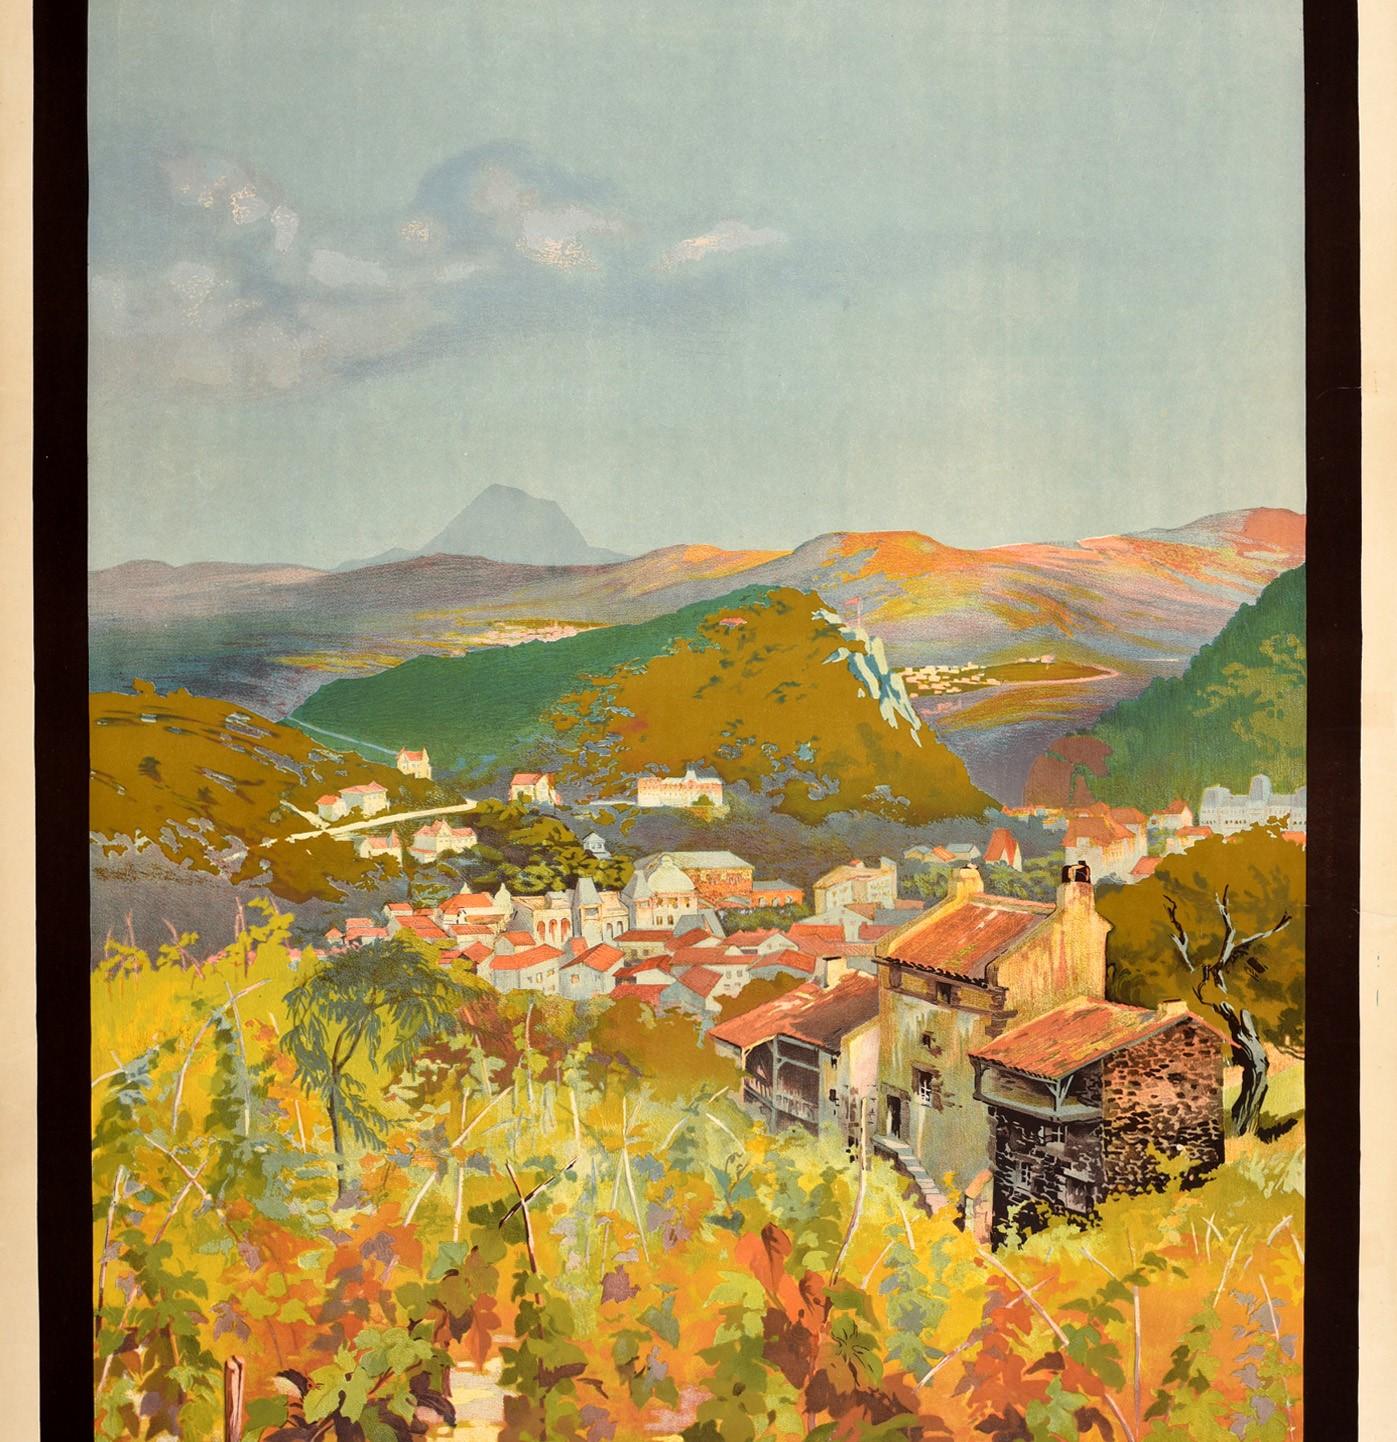 Original vintage travel advertising poster issued by PLM French railways Chemin de Fer Paris Lyon Mediterranee for Chatel Guyon in the Auvergne-Rhone-Alpes region featuring scenic artwork by Julien Lacaze (1886-1971) depicting a view of a vineyard